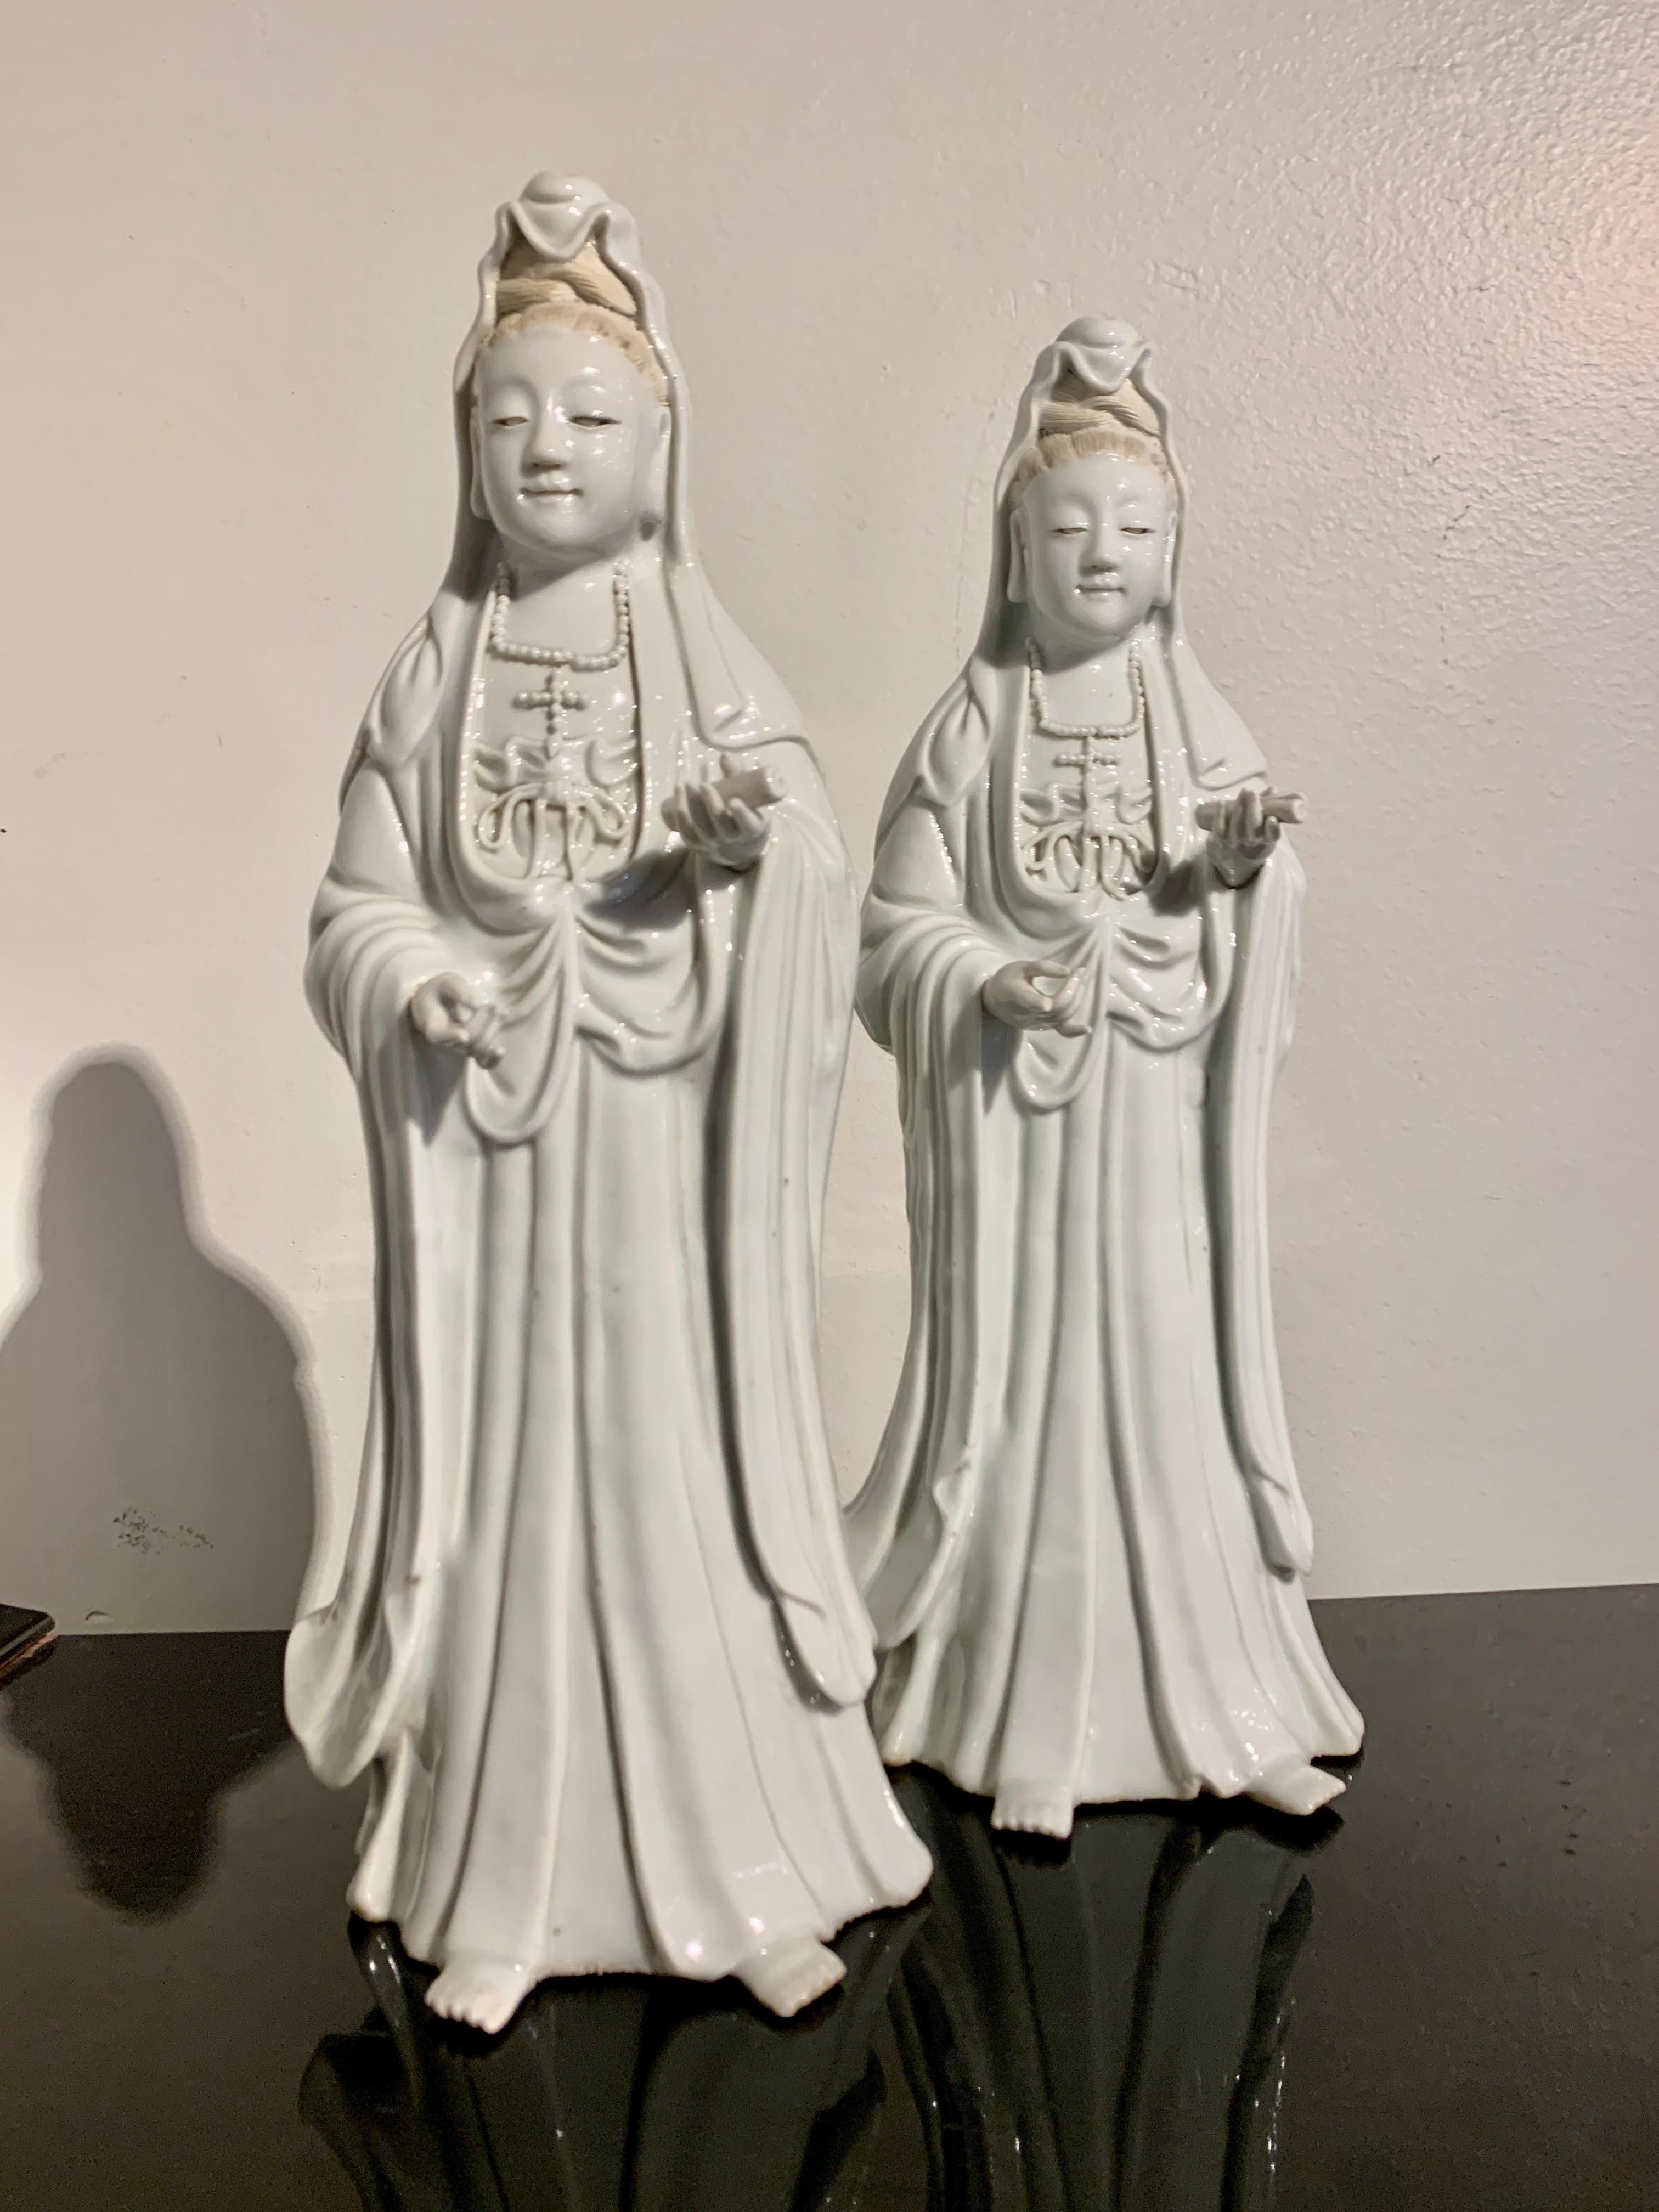 A sublime and rare pair of Chinese white glazed porcelain figures of Guanyin, attributed to Tang Ying (1682 - 1756), Qing Dynasty, Qianlong Period, China.

This ethereal pair of white glazed porcelain figures depict the revered Buddhist Goddess of